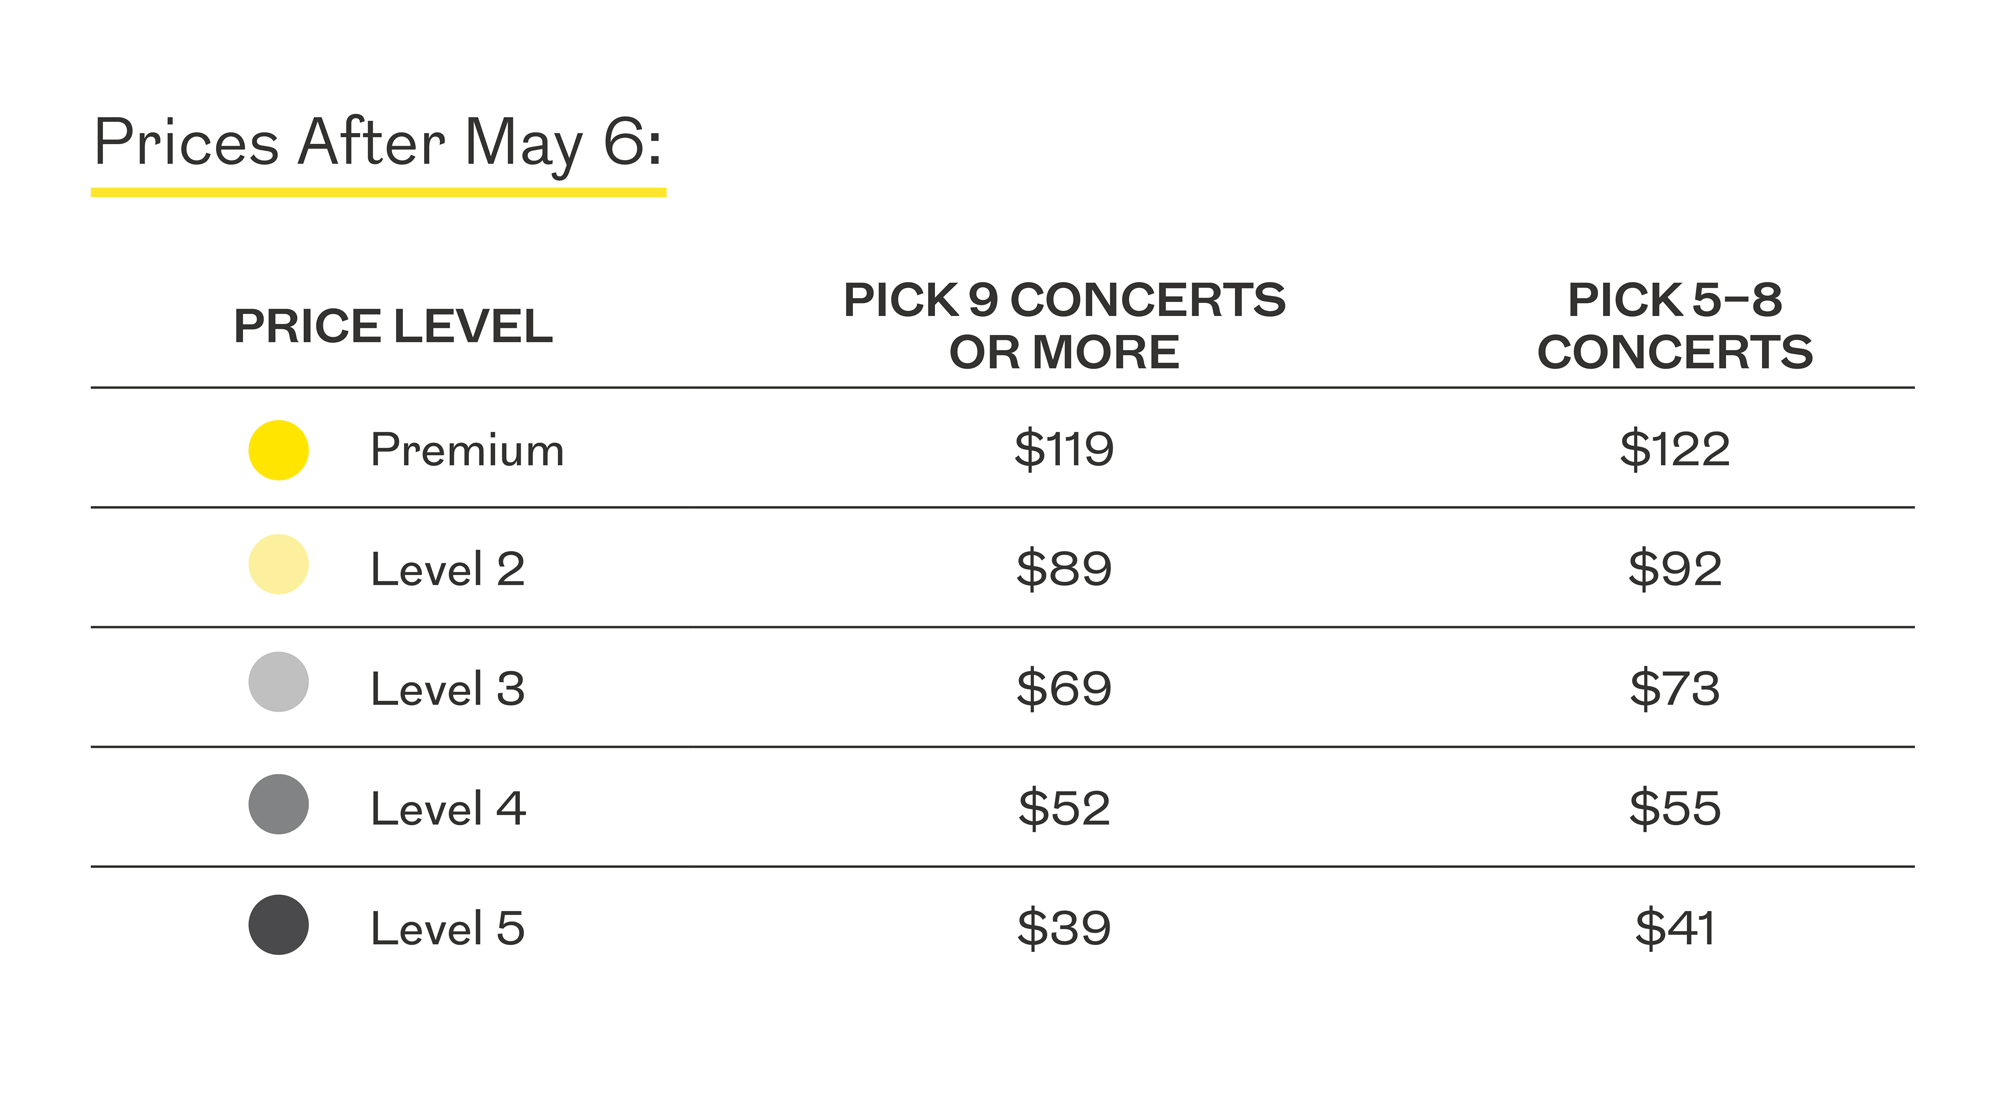 Prices after May 6